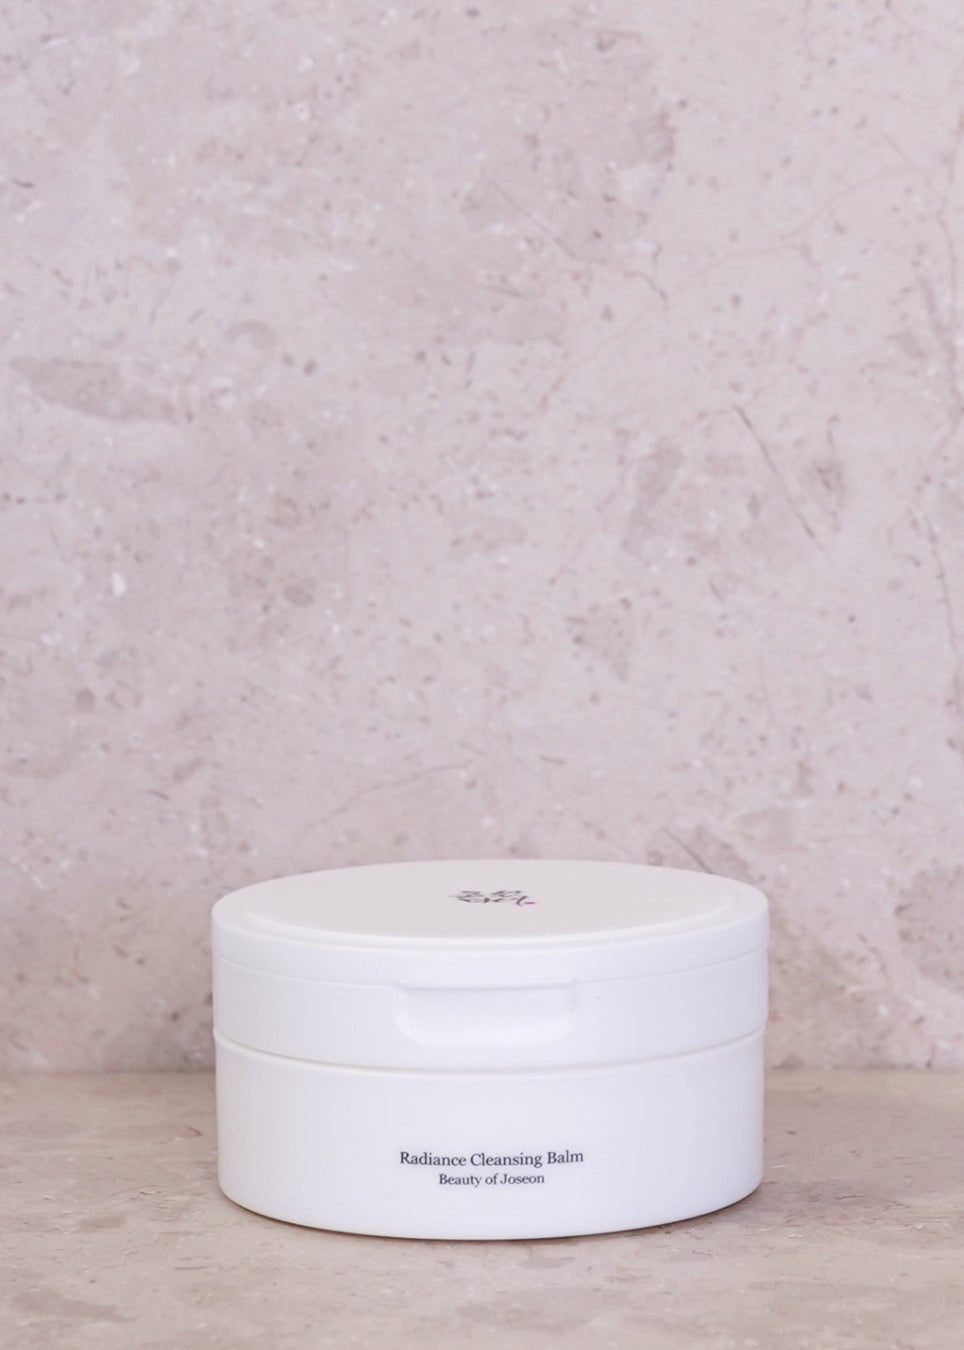 Beauty of Joseon Radiance Cleansing Balm | Buy now JOIN skincare